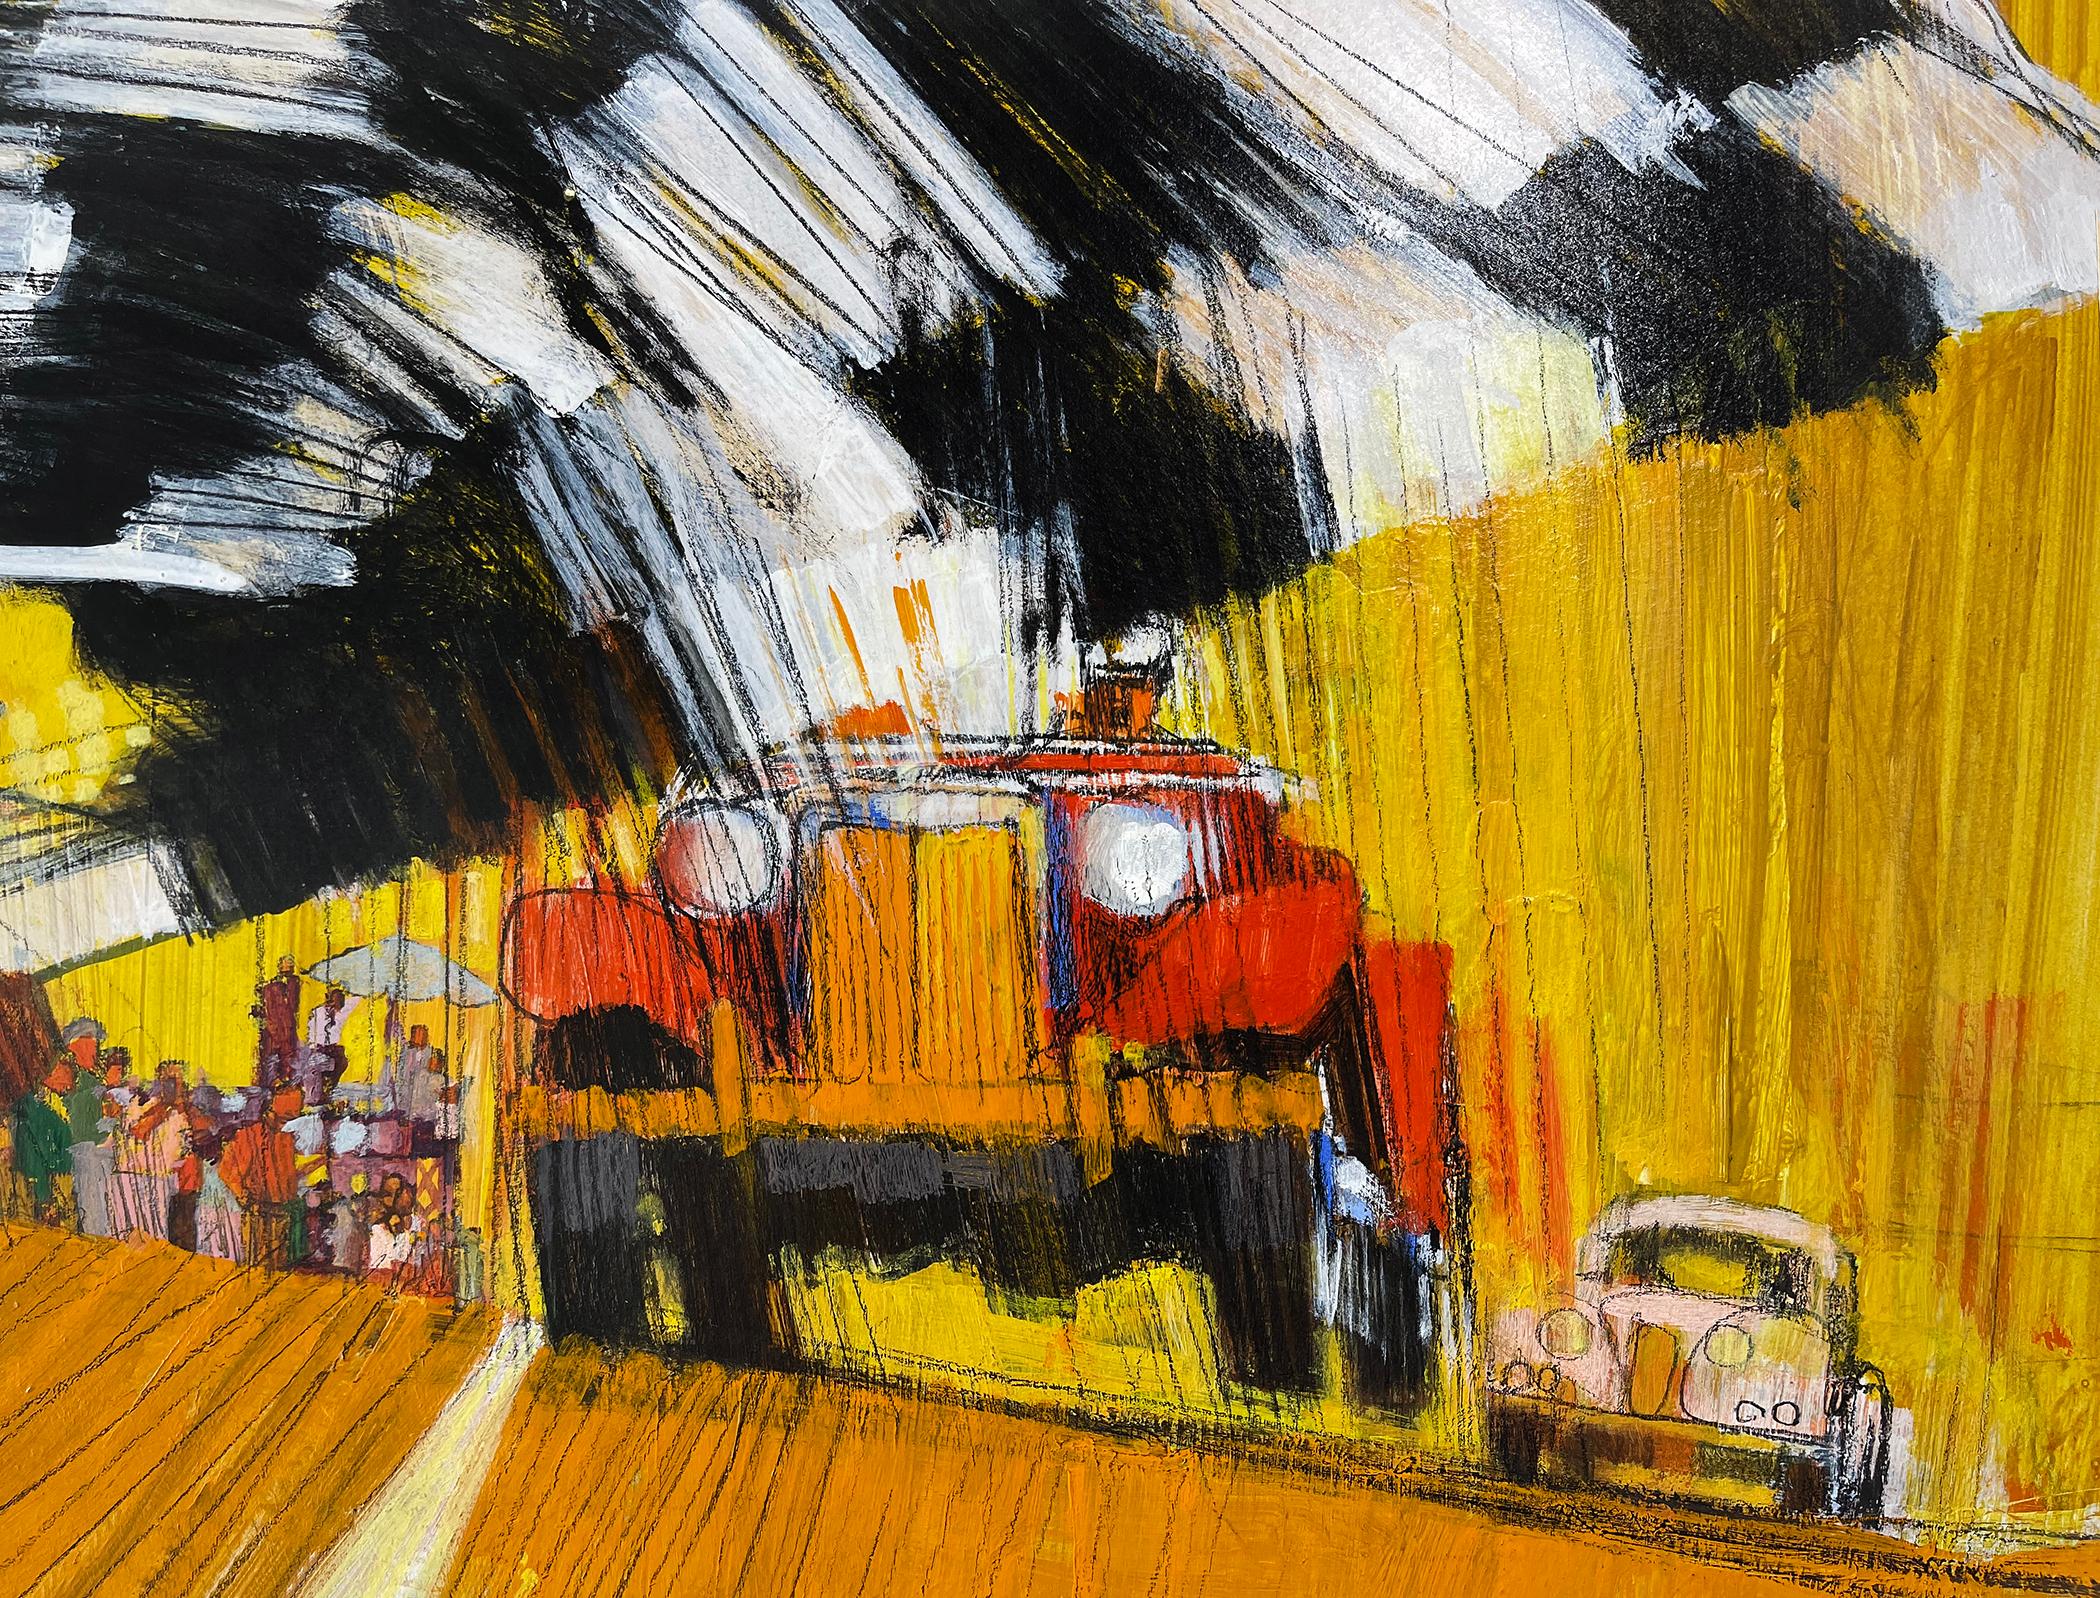 Motorsport Car Racing with Checkered Flag at Finish Line of a Race Track - Painting by Bob Peak